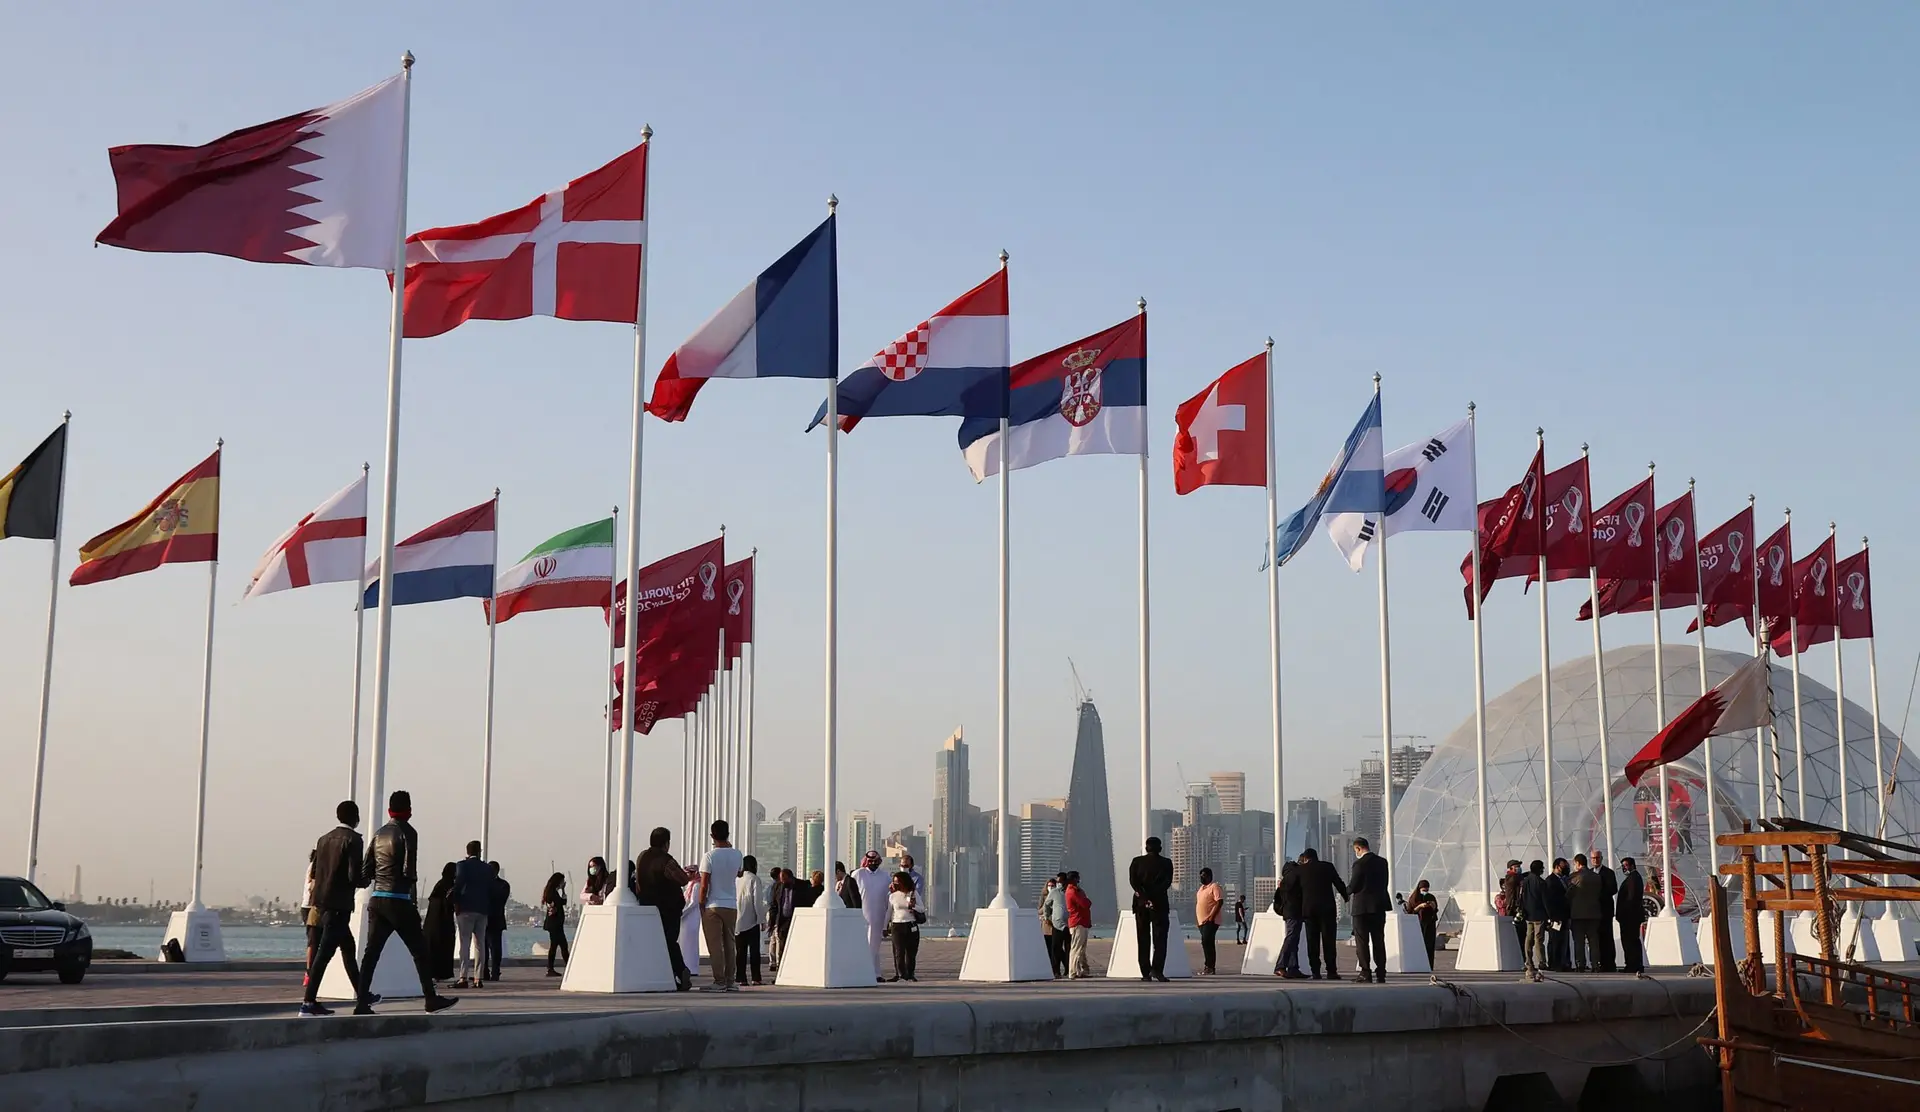 The flags of qualifying nations are raised along the Doha Corniche, in front of the countdown clock on February 3, 2022, as Qatar prepares to host the FIFA World Cup 2022. (Photo by KARIM JAAFAR / AFP) (Photo by KARIM JAAFAR/AFP via Getty Images)